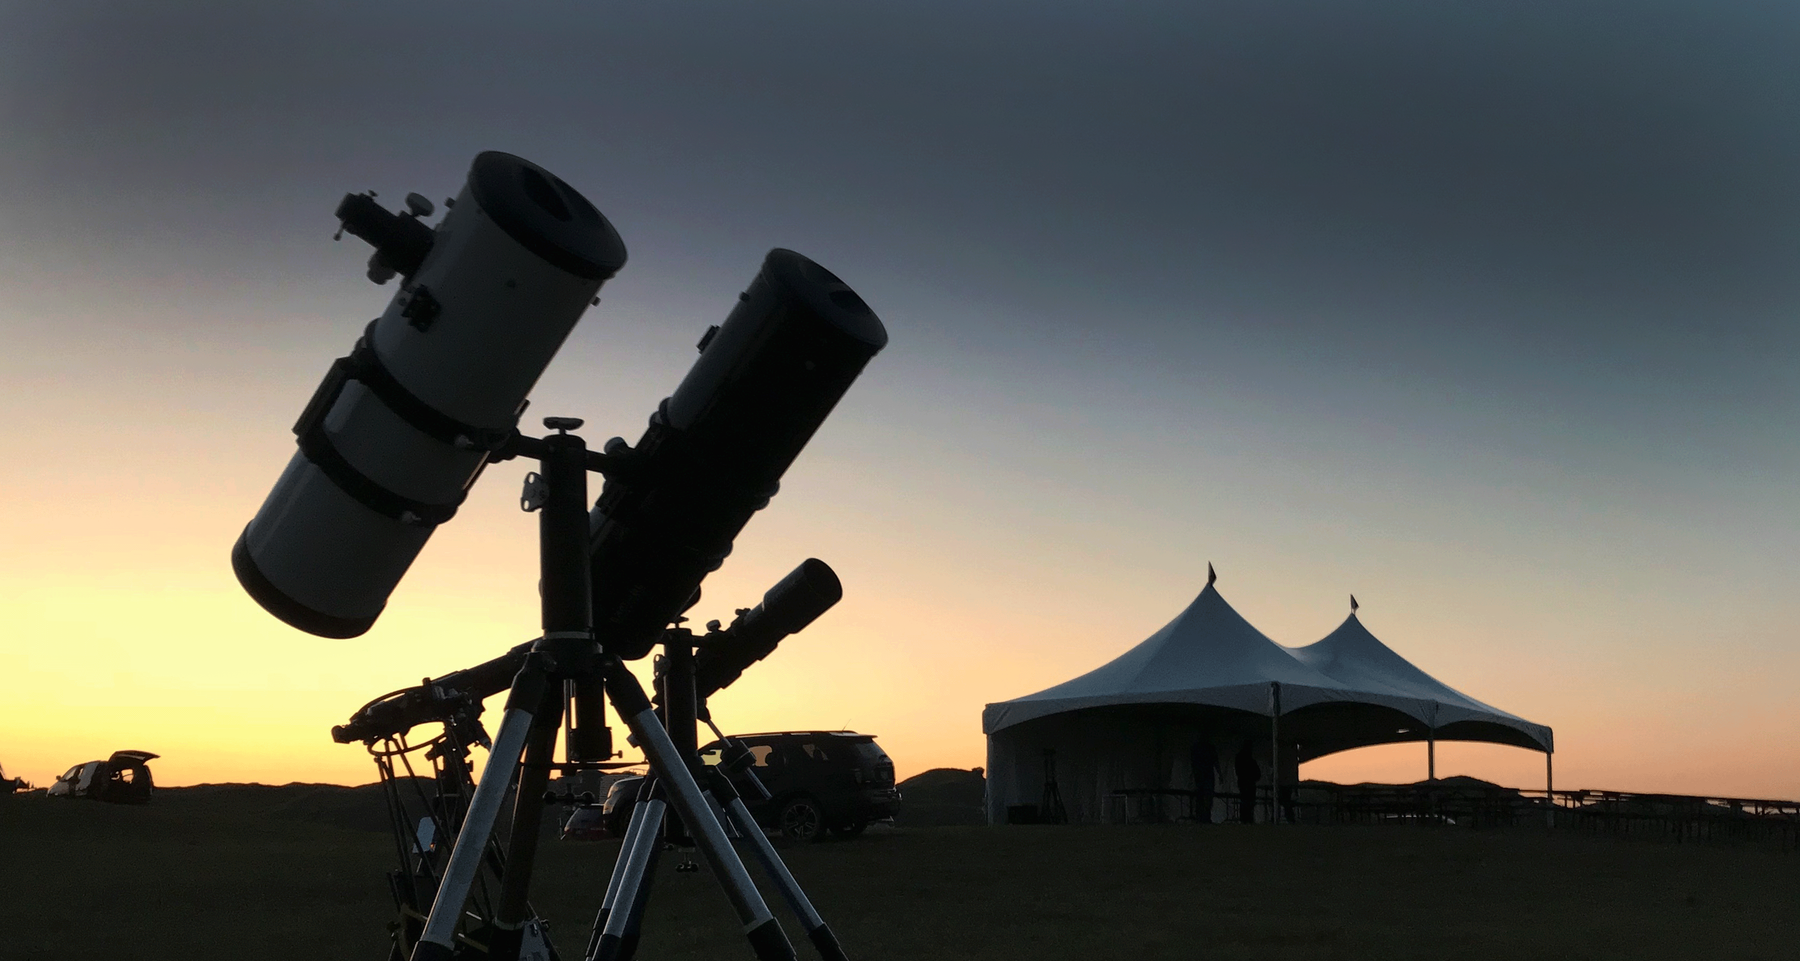 Discover the Wonders of the Cosmos with Explore Scientific at the Nebraska Star Party